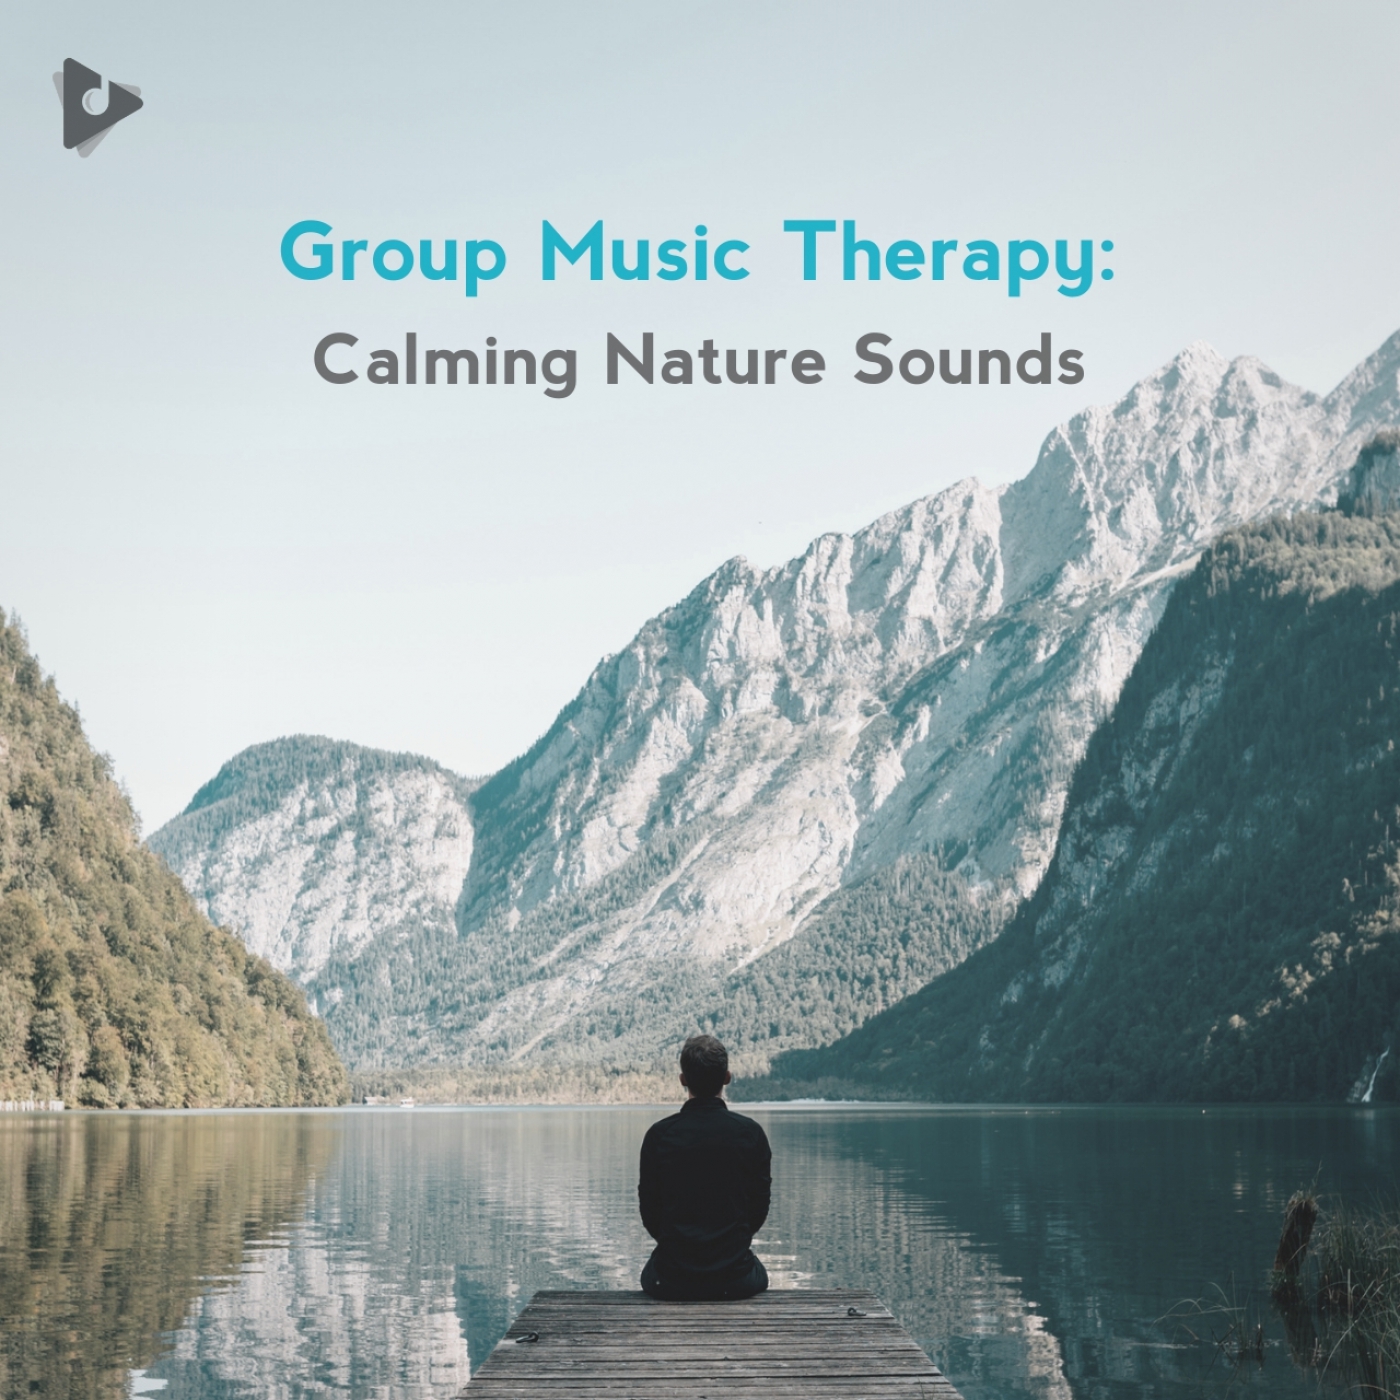 Group Music Therapy: Calming Nature Sounds